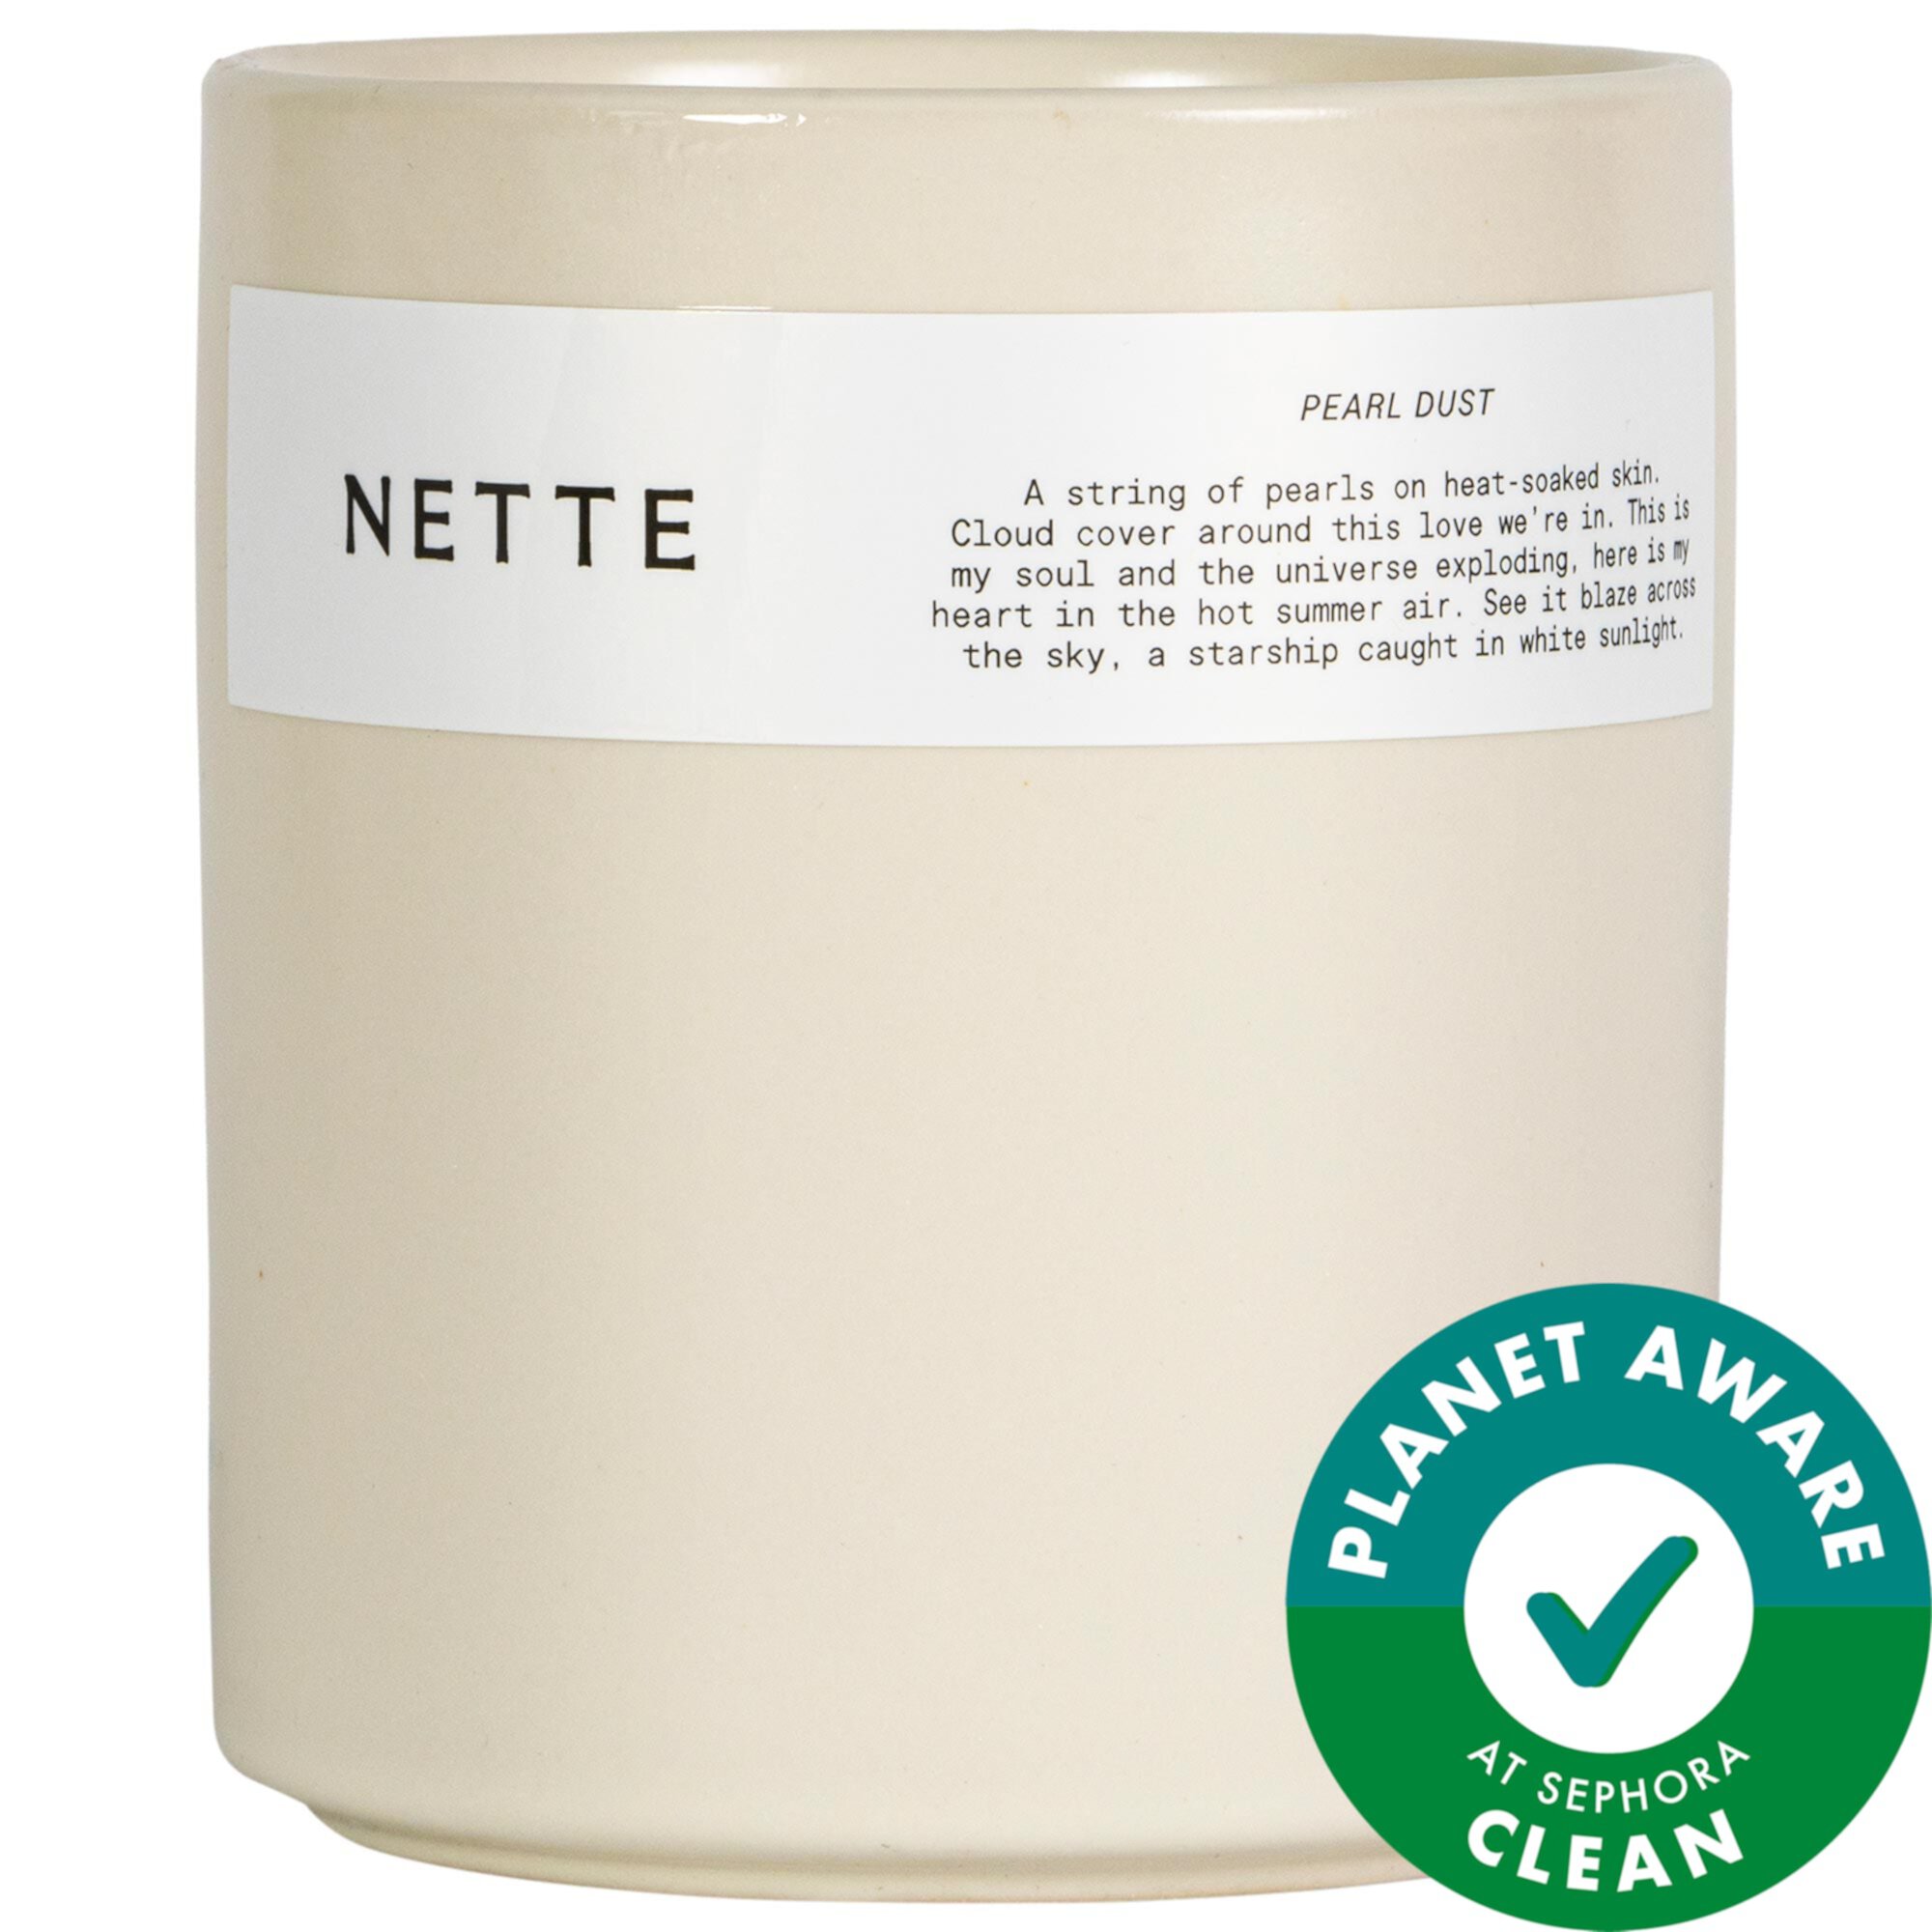 Pearl Dust Candle Nette